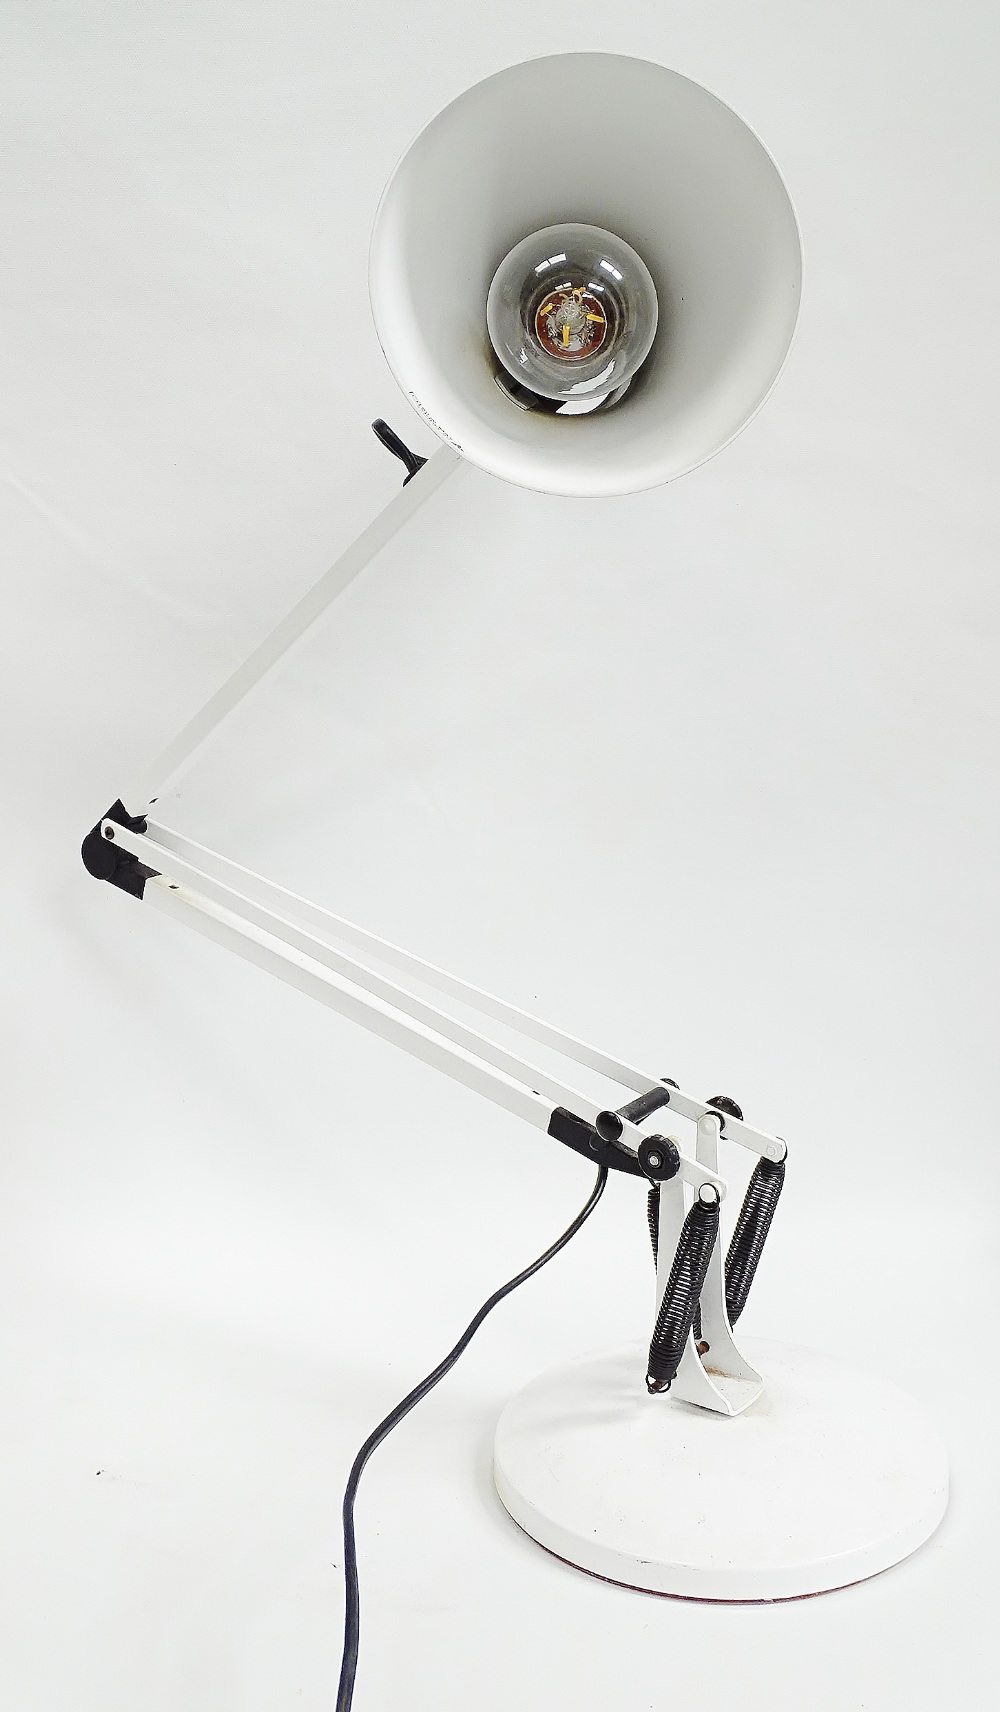 Anglepoise - A model 90 white anglepoise lamp with round base, height 88.5cm.